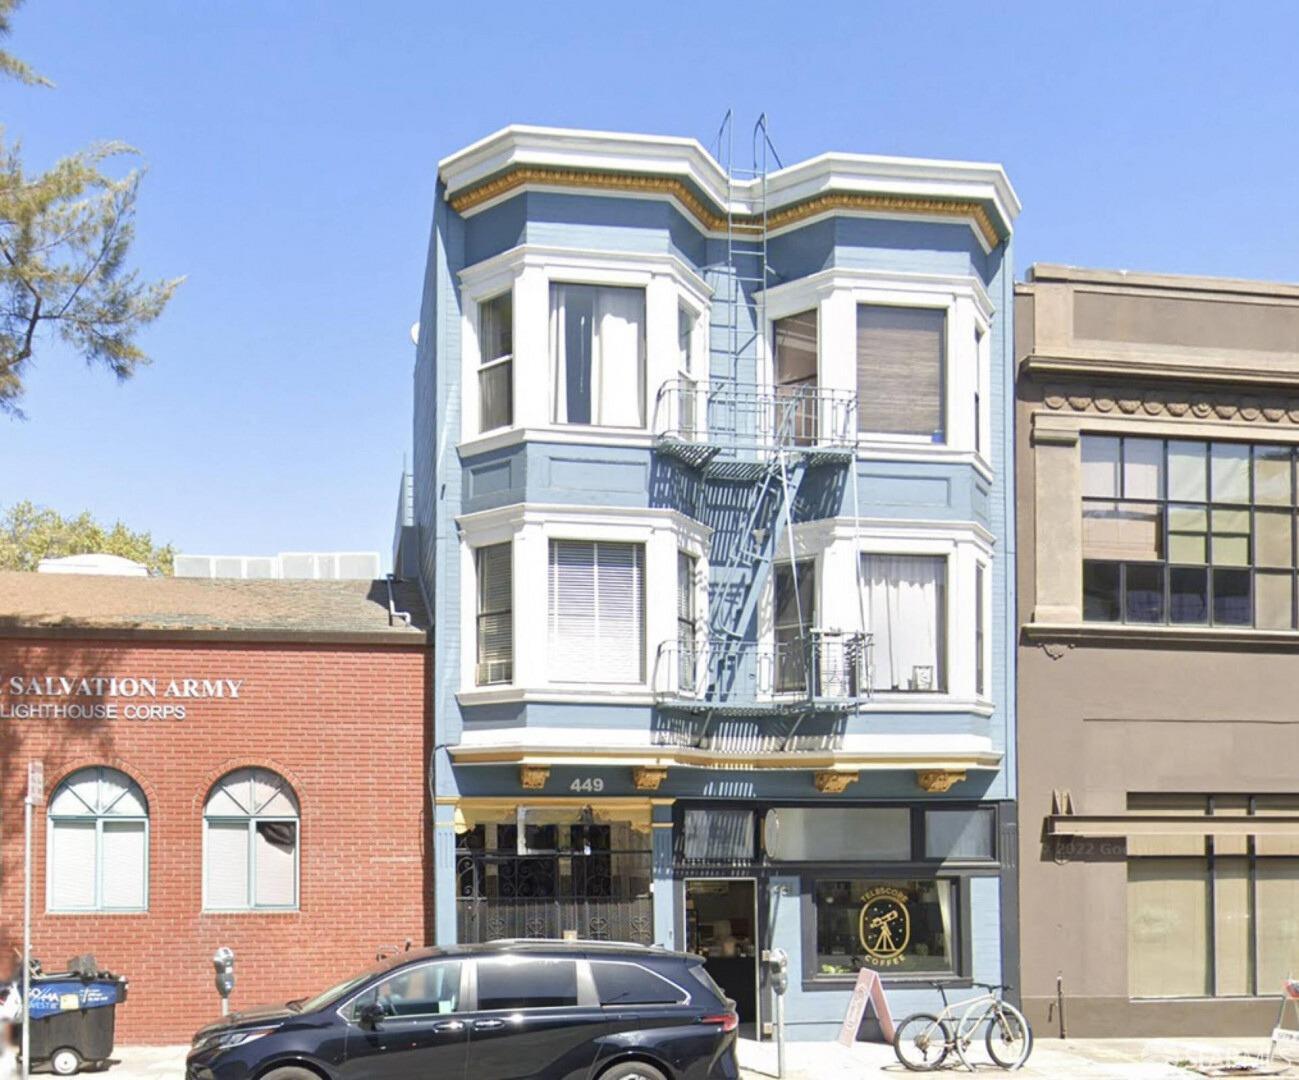 Photo of 449-451 9th St in San Francisco, CA